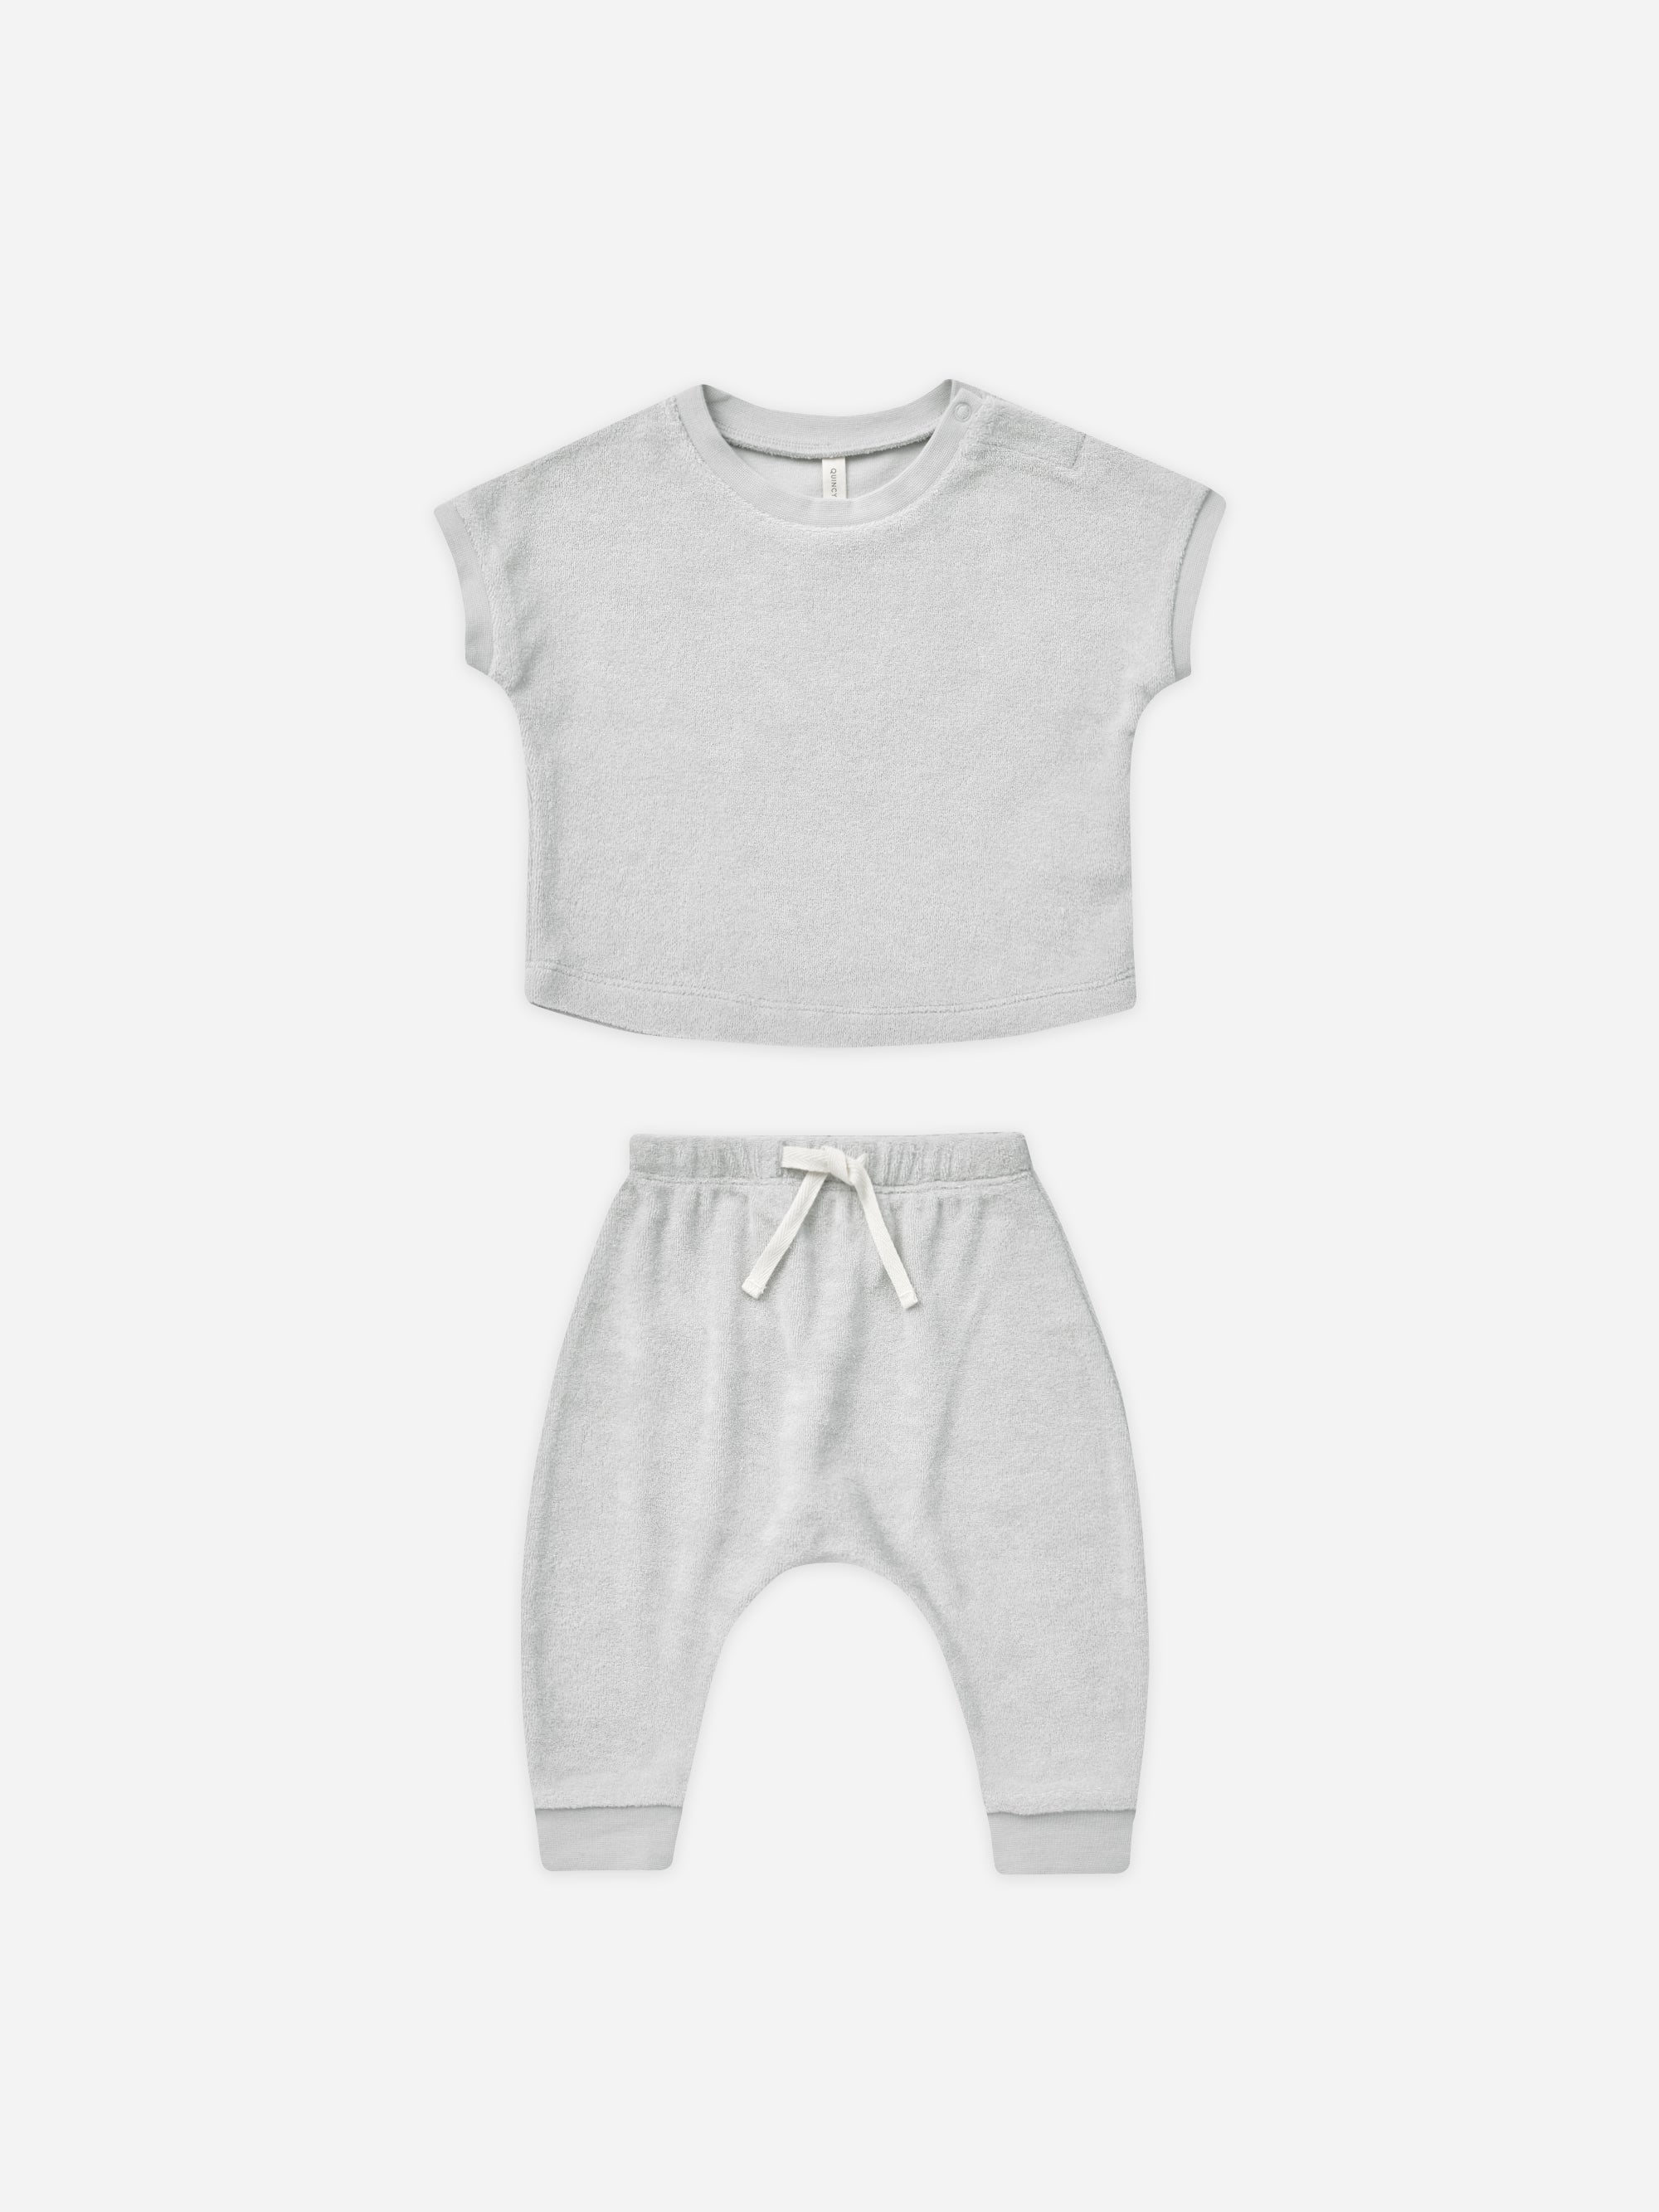 Terry Tee + Pant Set || Cloud - Rylee + Cru | Kids Clothes | Trendy Baby Clothes | Modern Infant Outfits |